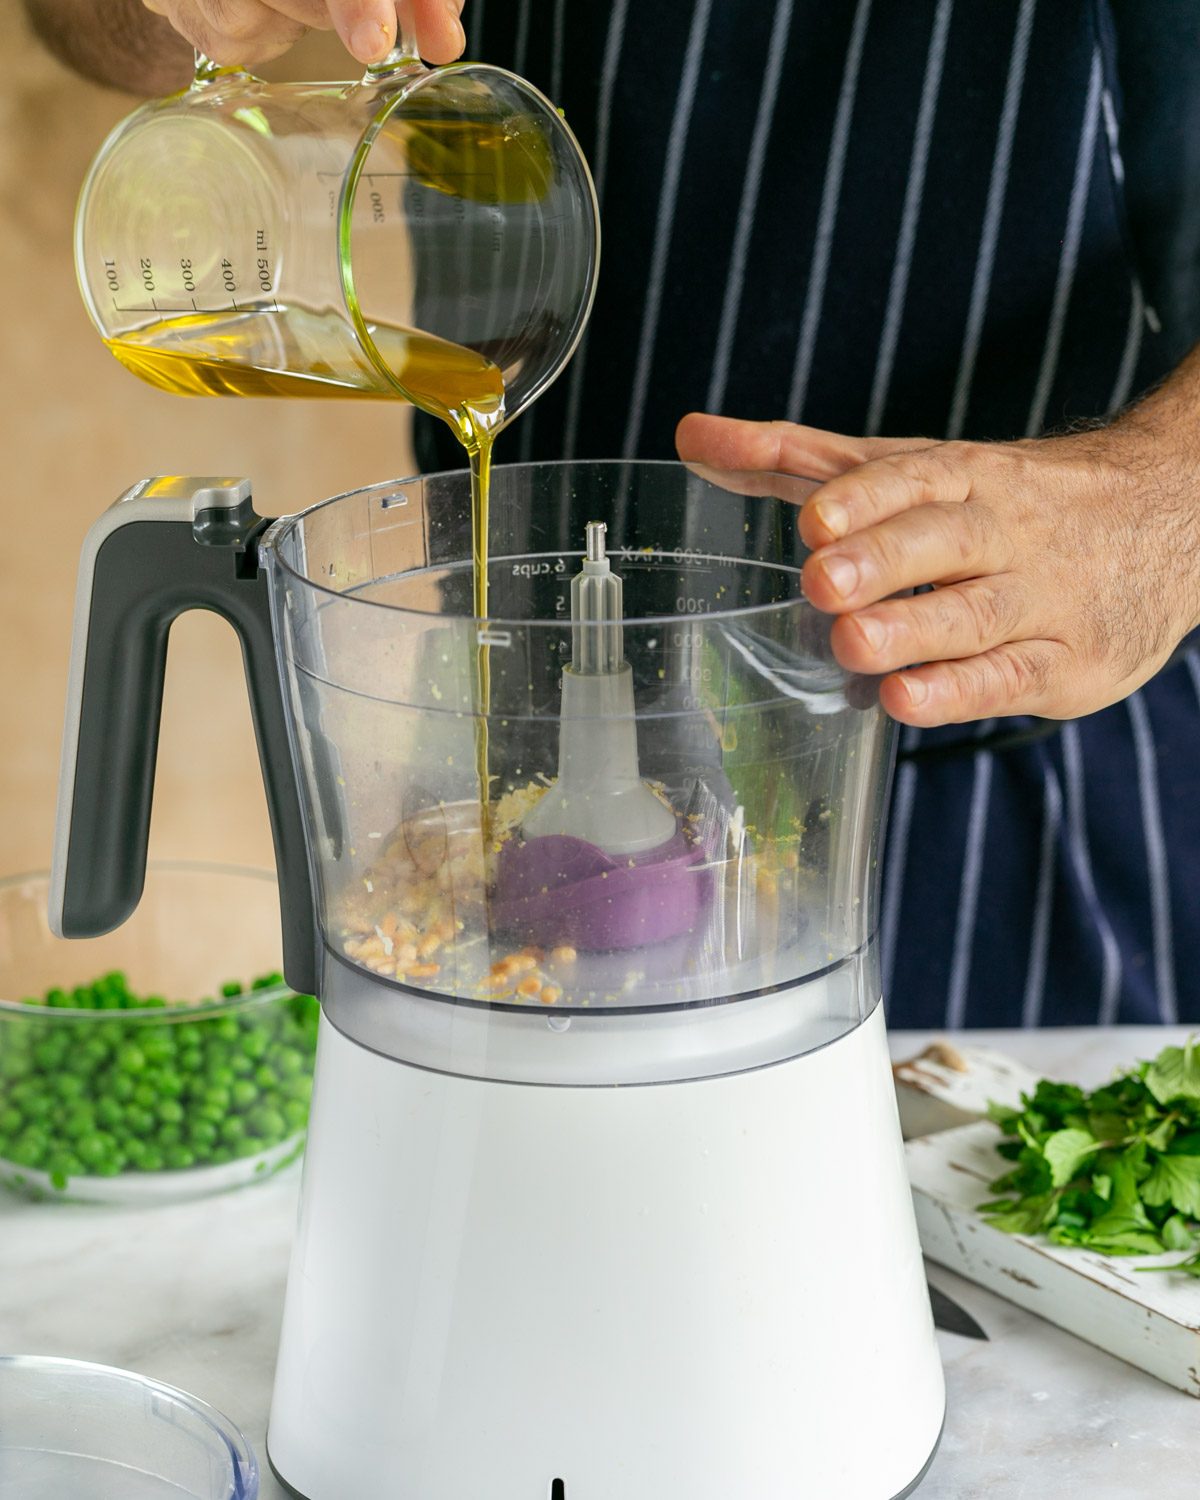 Pour the olive oil into the food processor